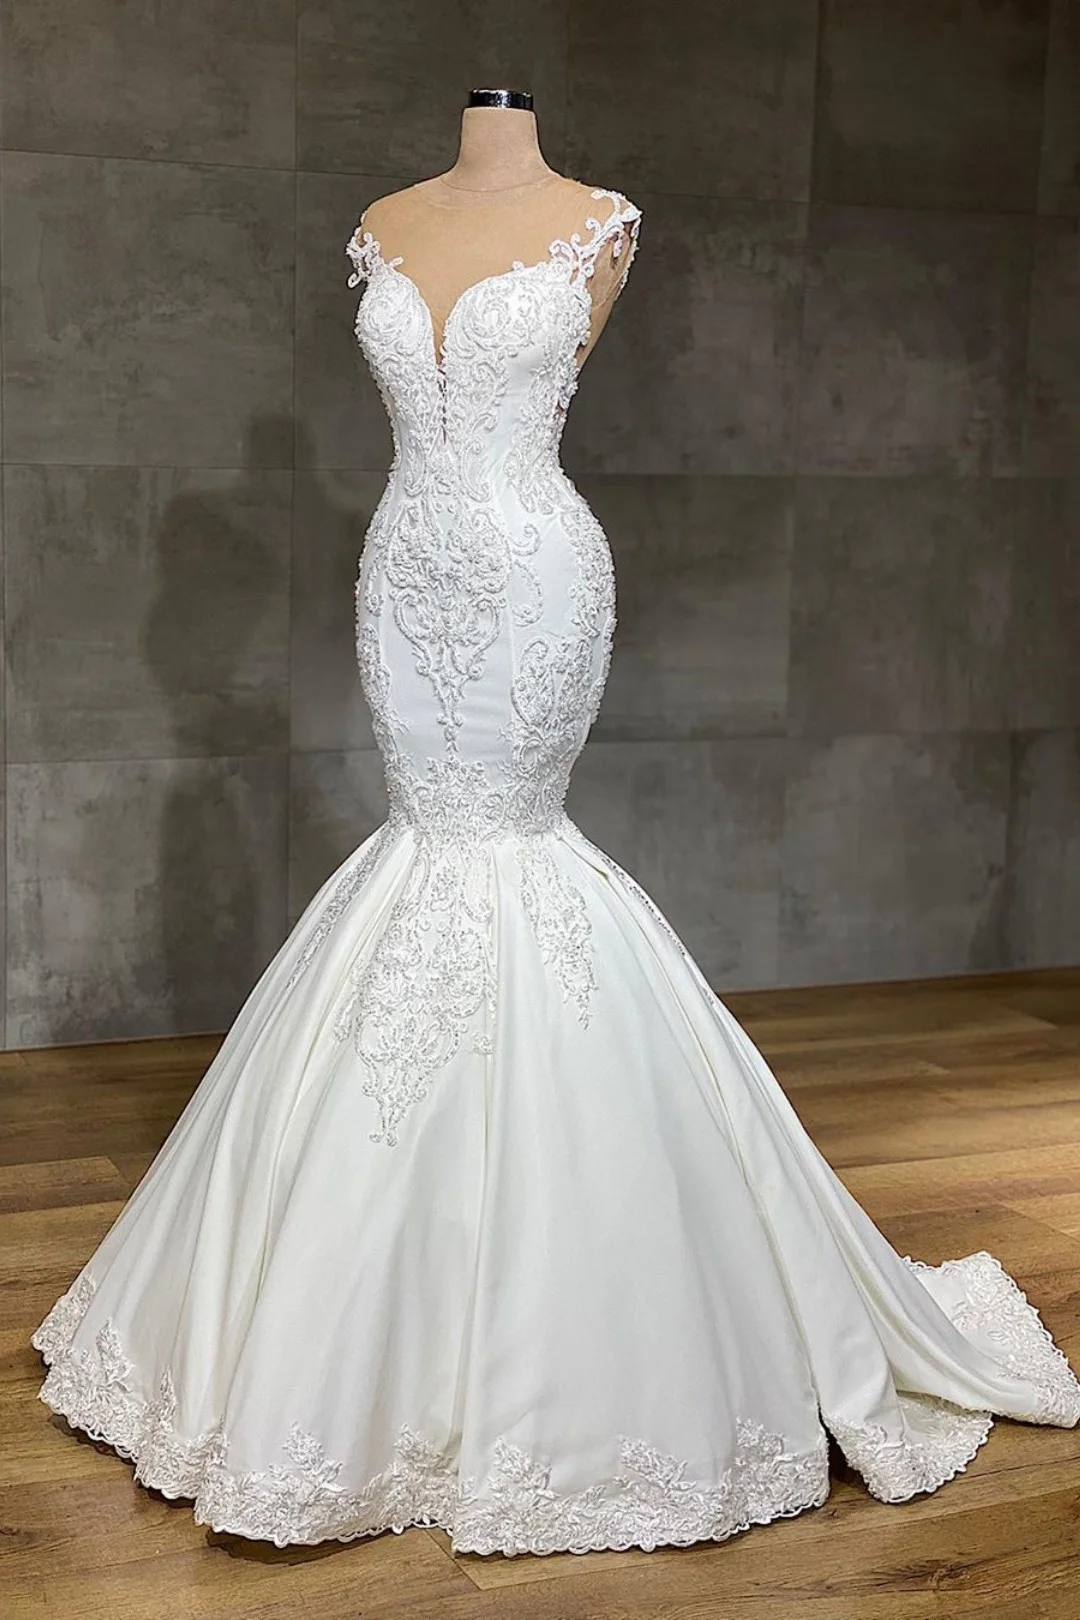 Lace Sweetheart V-neck Sleeveless Mermaid Wedding Dresses With Appliques